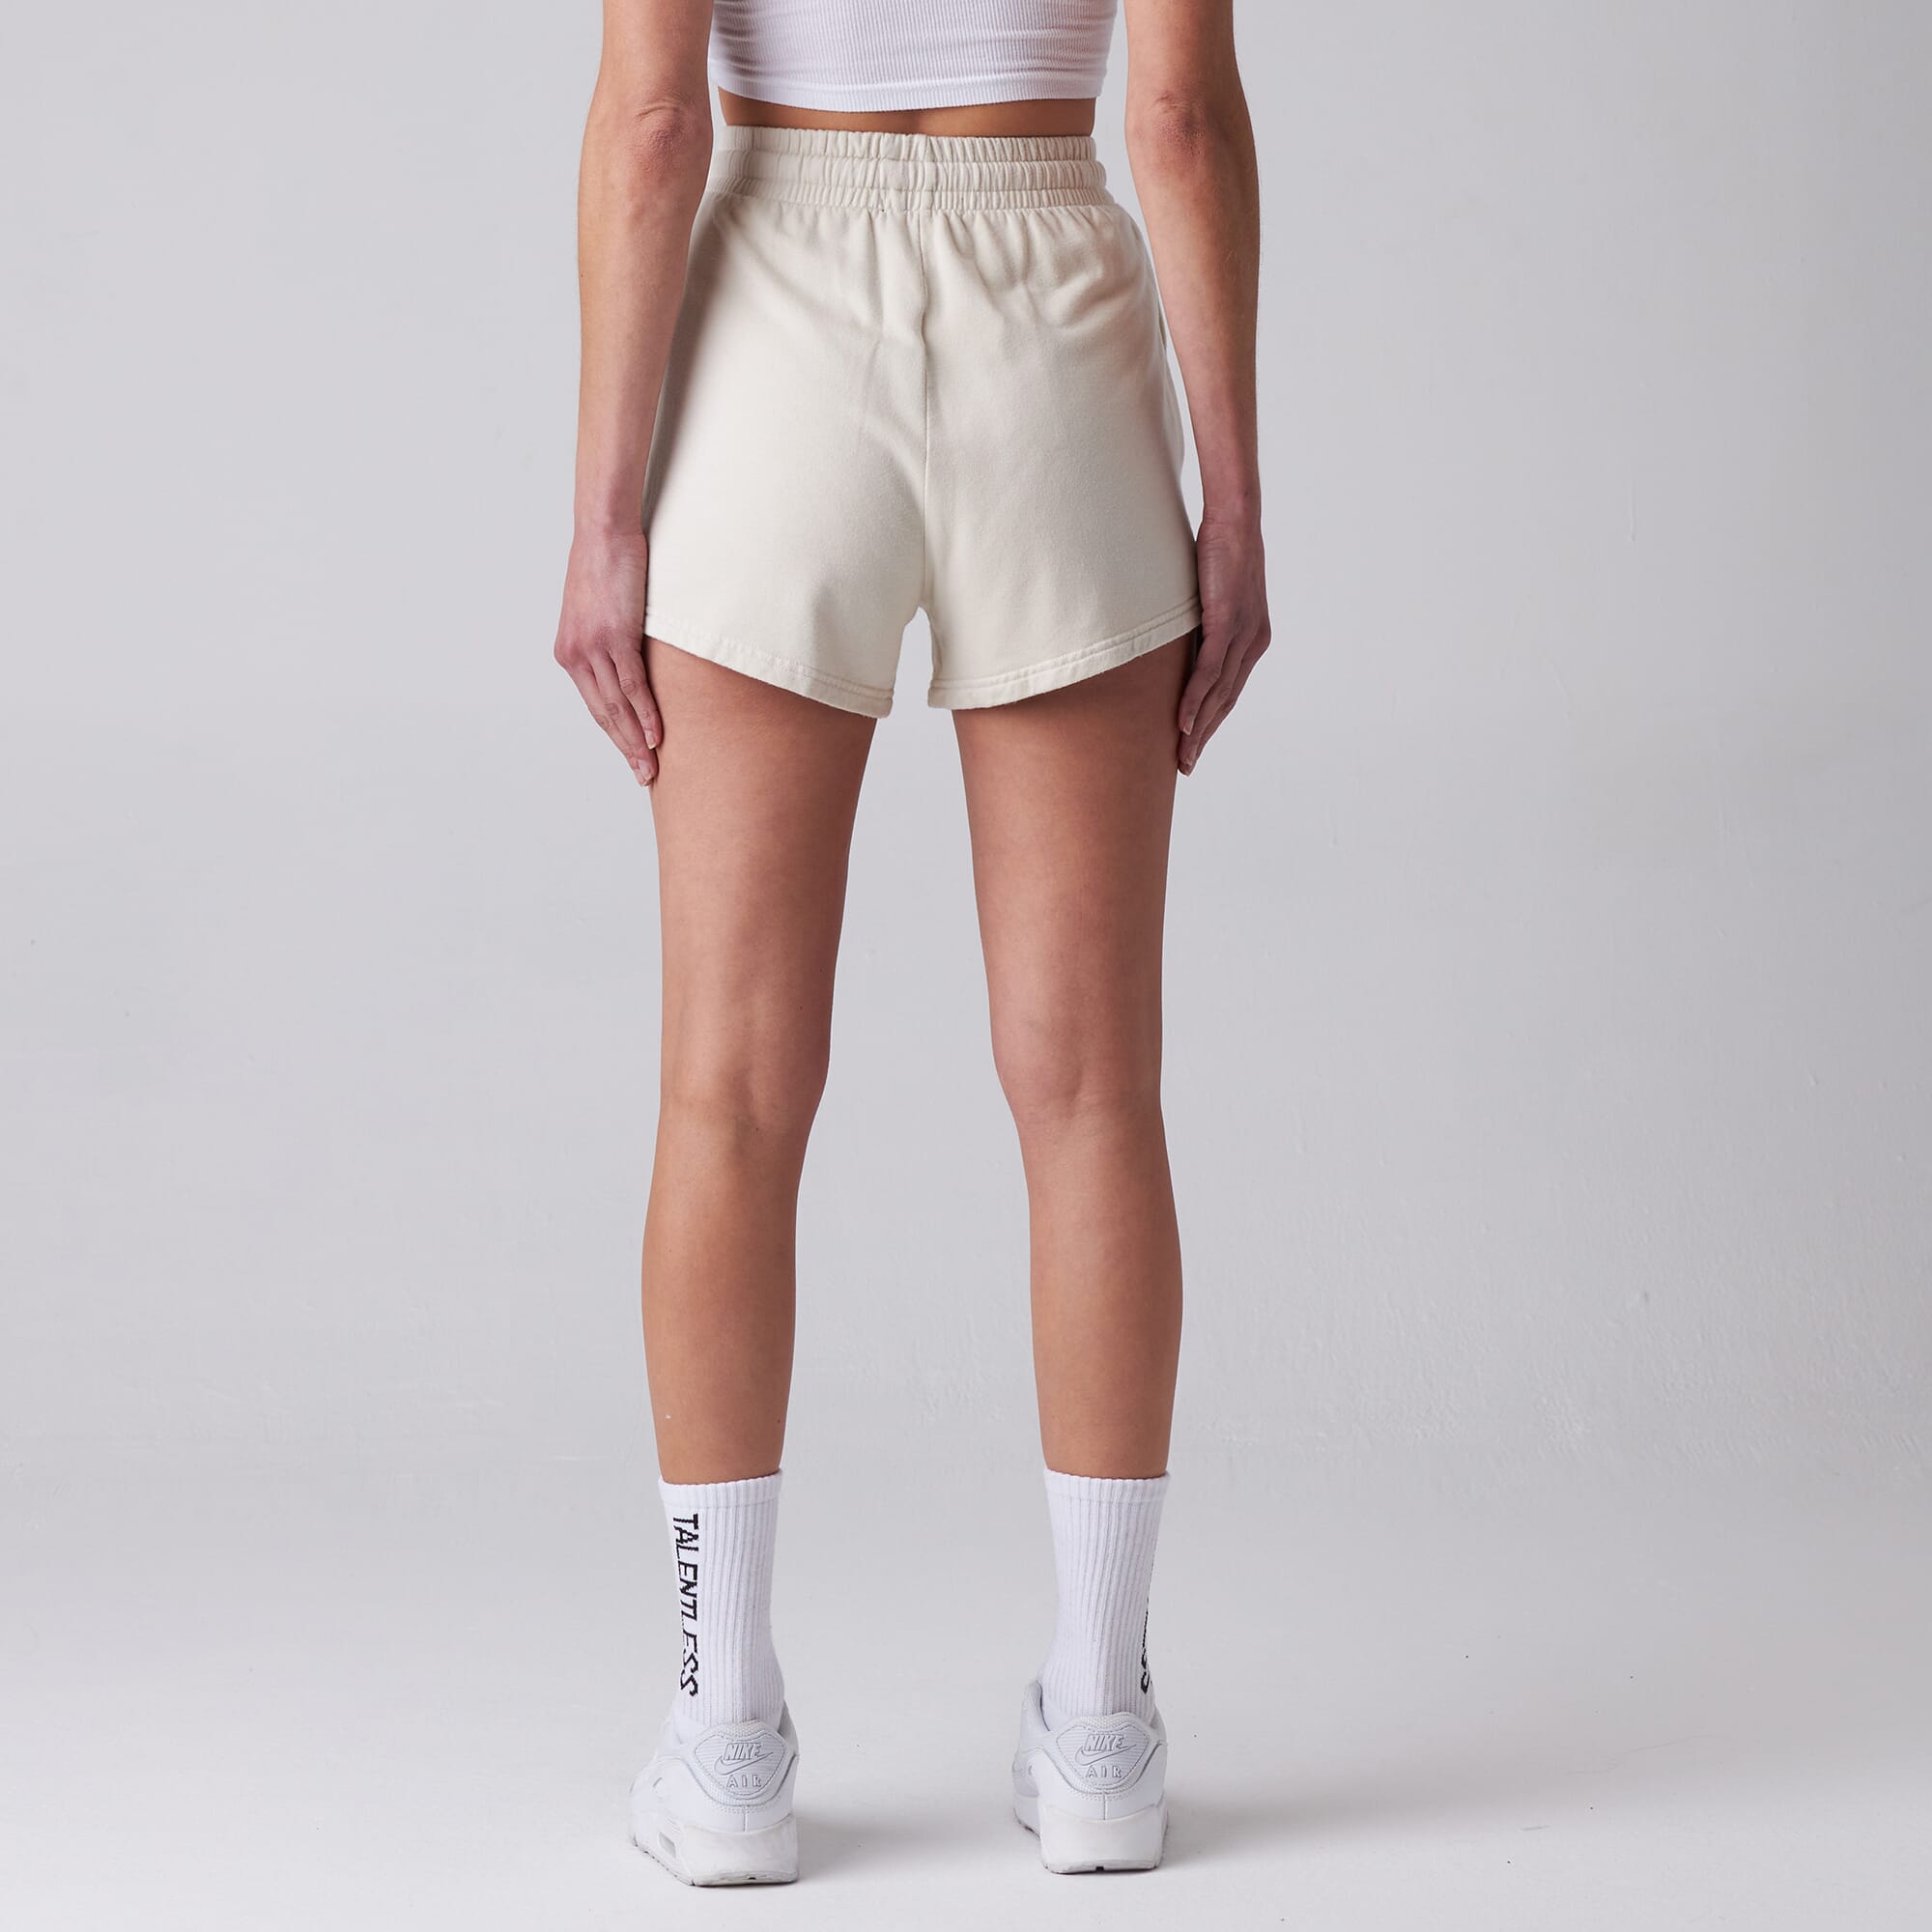 White short total look with modal